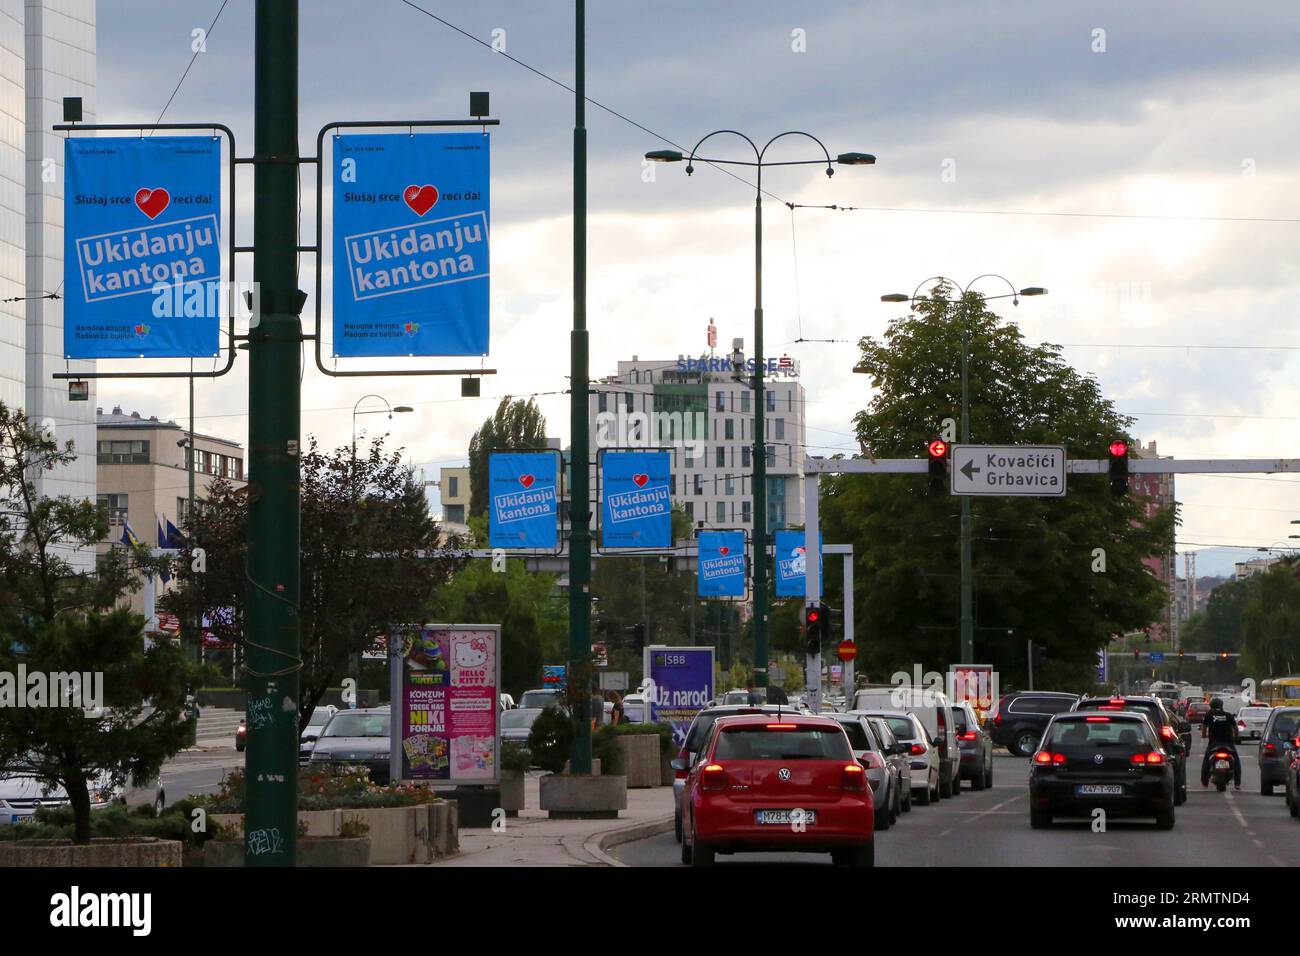 Campaign posters are seen in the center of Sarajevo, Bosnia and Herzegovina, on Sept. 12, 2014. With the month-long campaign for the general elections officially kicking off in BiH on Friday, the Balkan state begins the complex process to bring in new governments, assemblies and presidencies in different levels. ) BOSNIA AND HERZEGOVINA-SARAJEVO-GENERAL ELECTIONS-CAMPAIGN HarisxMemija PUBLICATIONxNOTxINxCHN   Campaign Posters are Lakes in The Center of Sarajevo Bosnia and Herzegovina ON Sept 12 2014 With The Month Long Campaign for The General Elections officially KICKING off in BIH ON Friday Stock Photo